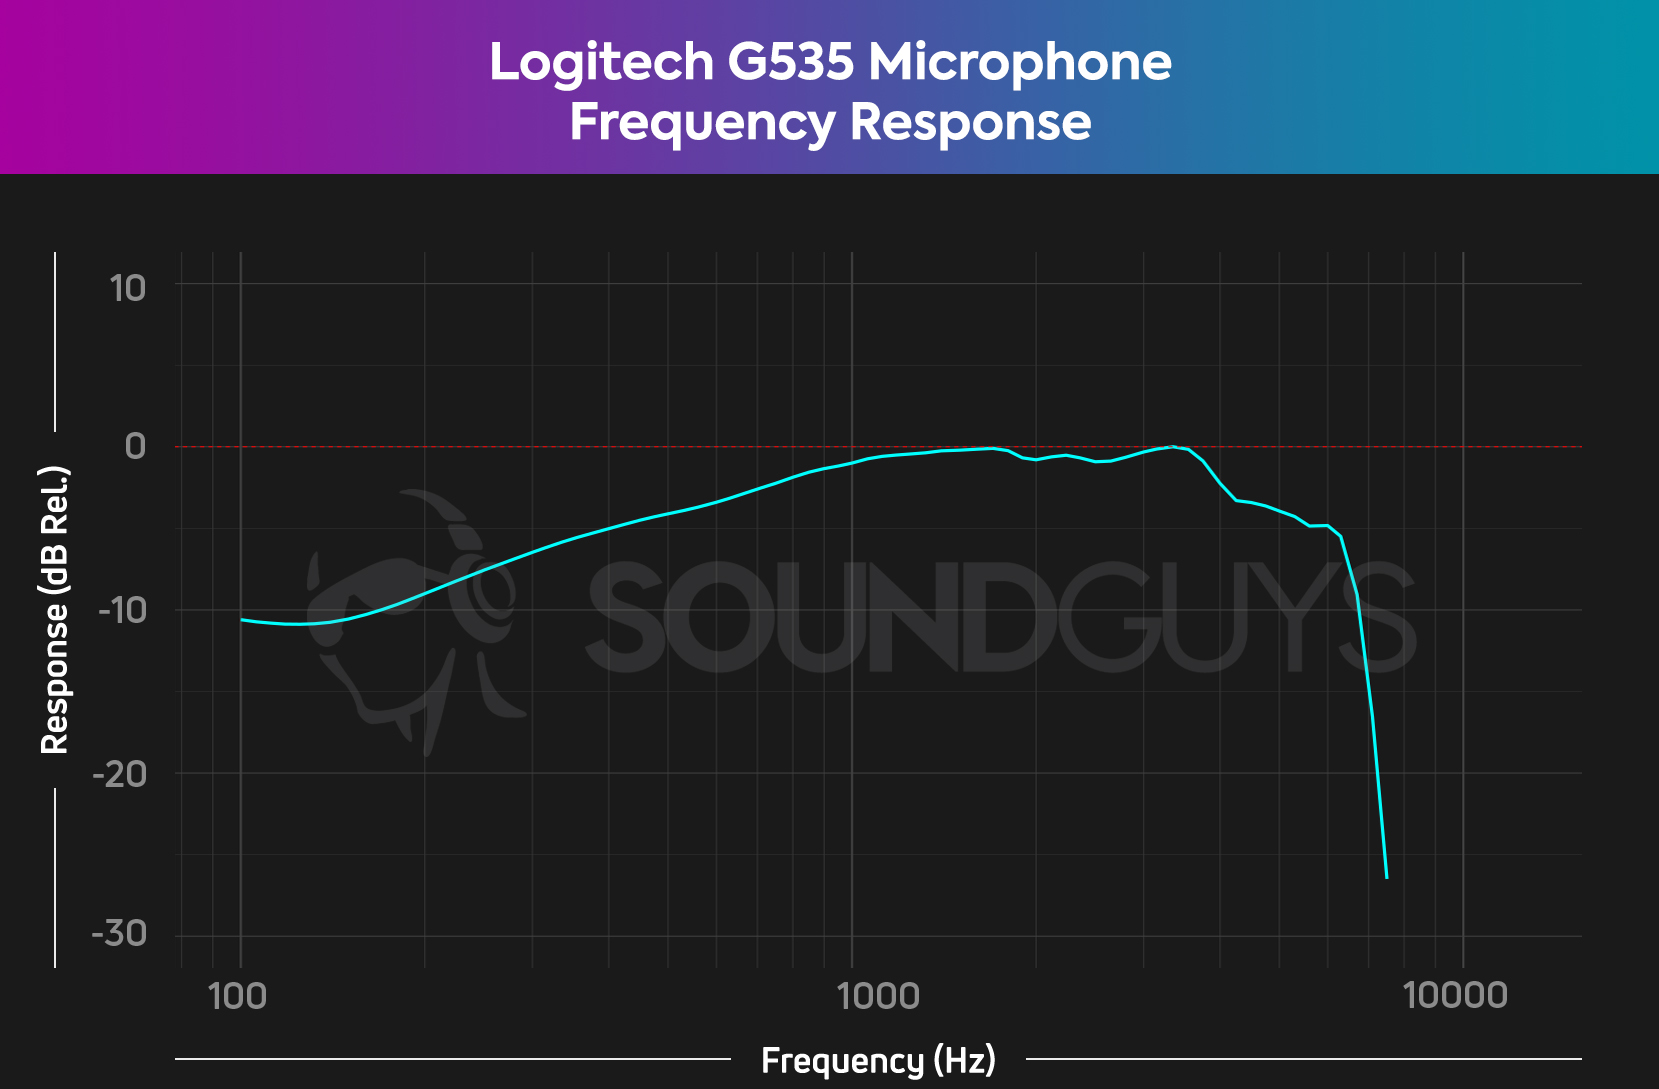 The microphone frequency response chart for the Logitech G535.